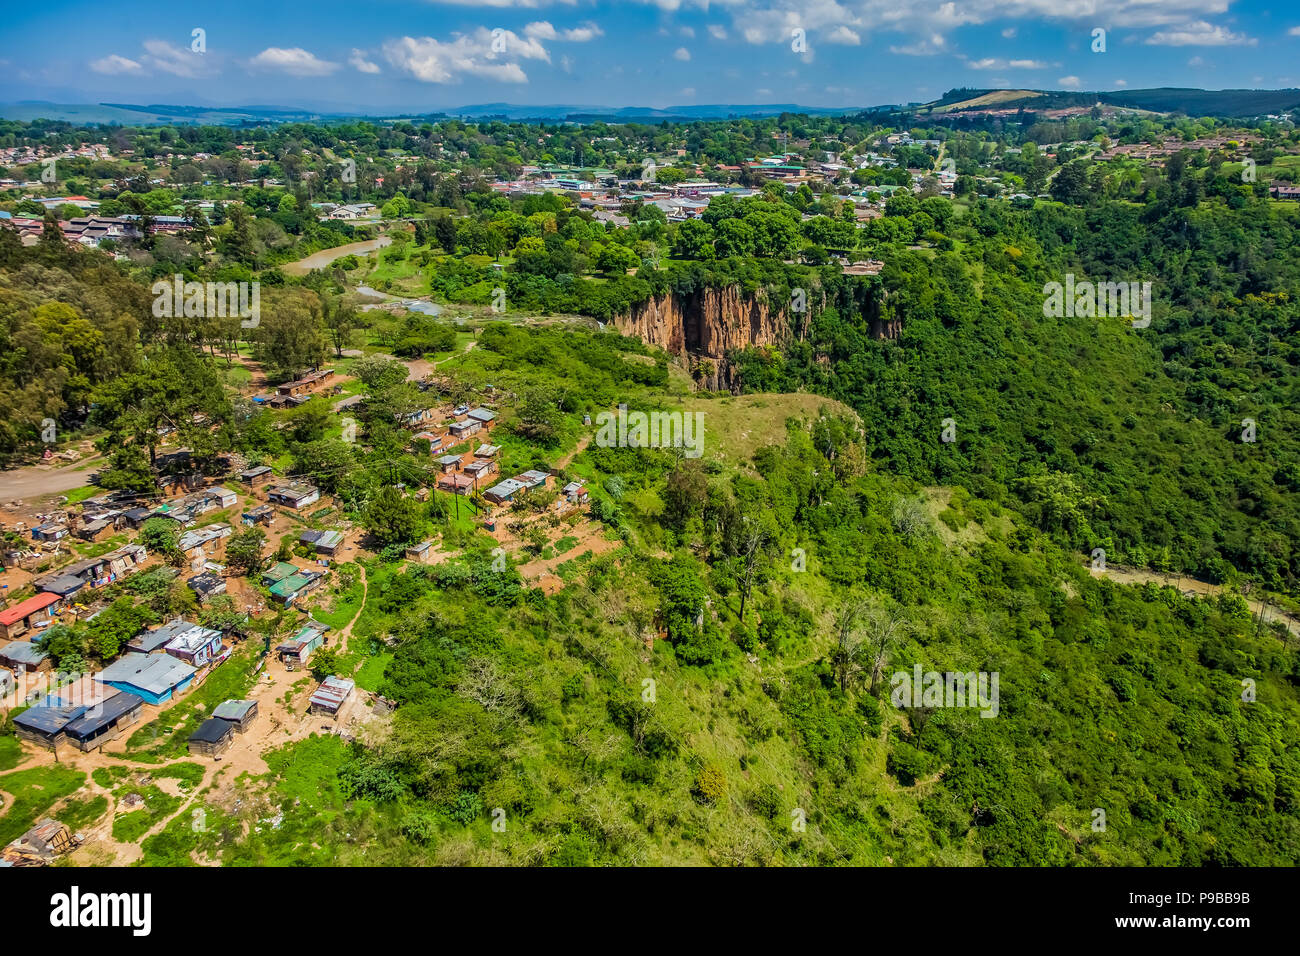 Howick, South Africa, October 19, 2012, Aerial View of Low income housing near Howick Falls KwaZulu-Natal South Africa Stock Photo